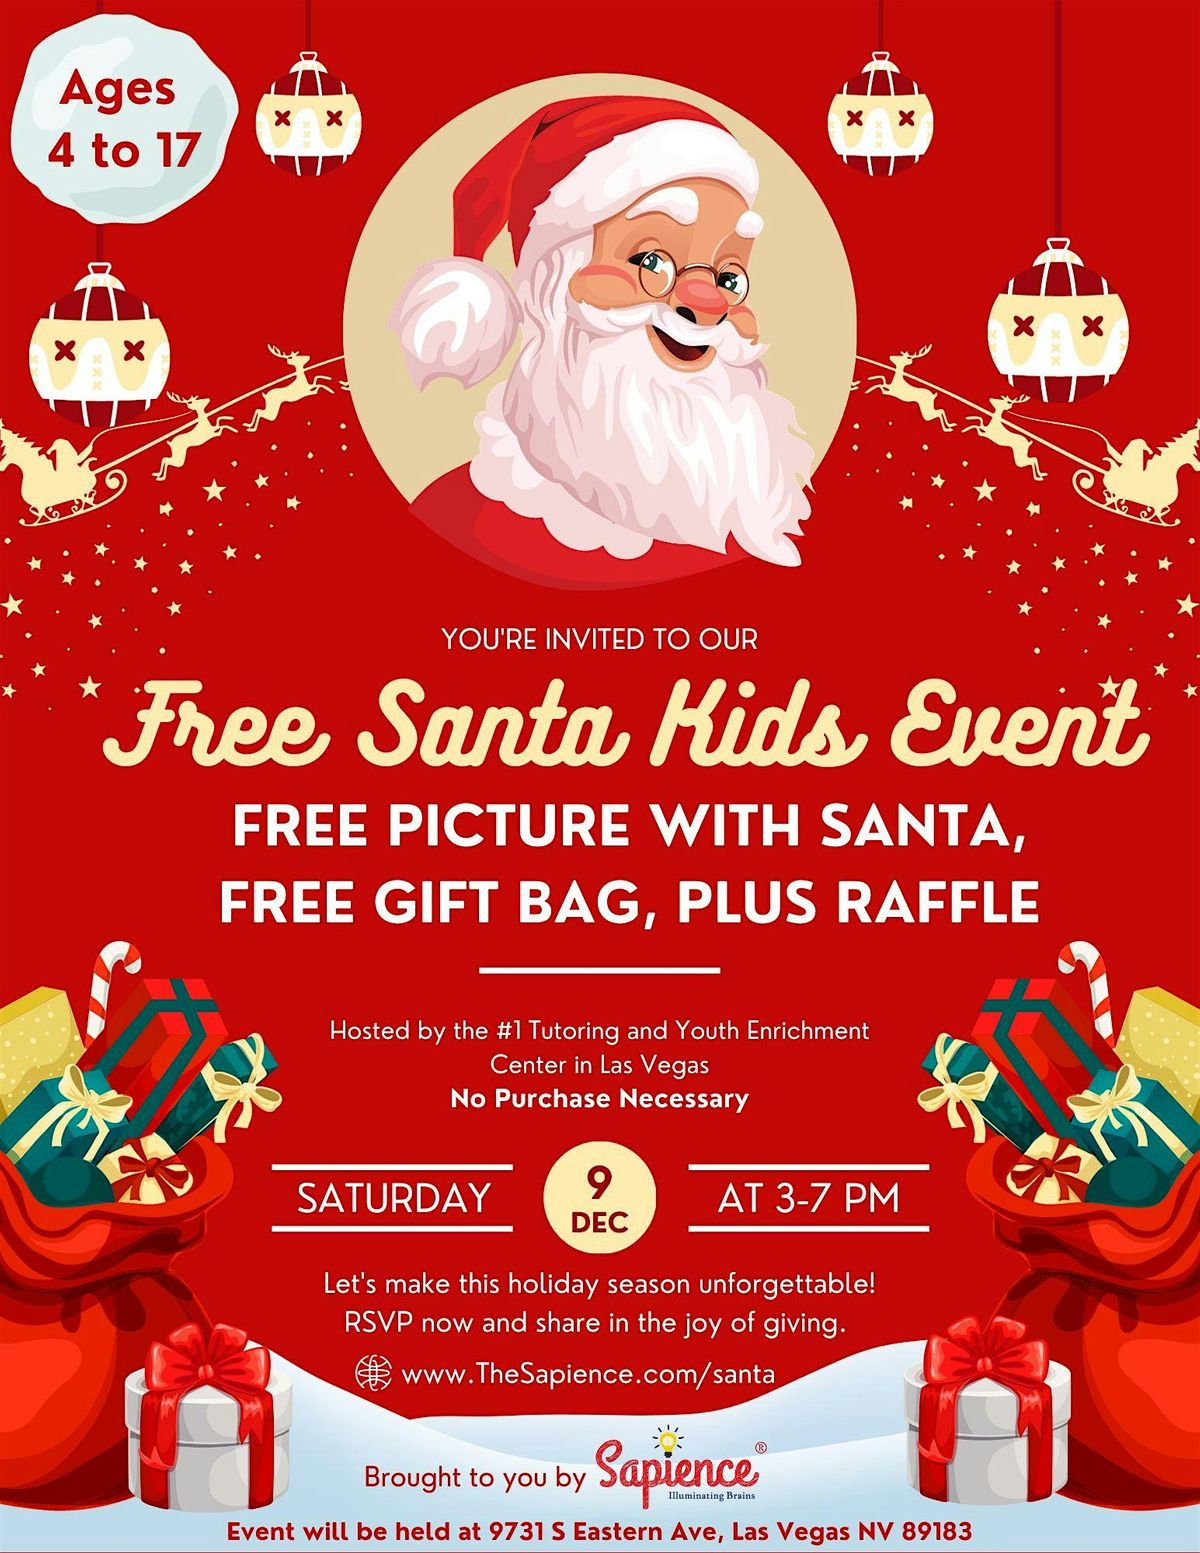 Free Pics & Gifts with Santa For Kids! Plus free raffle!